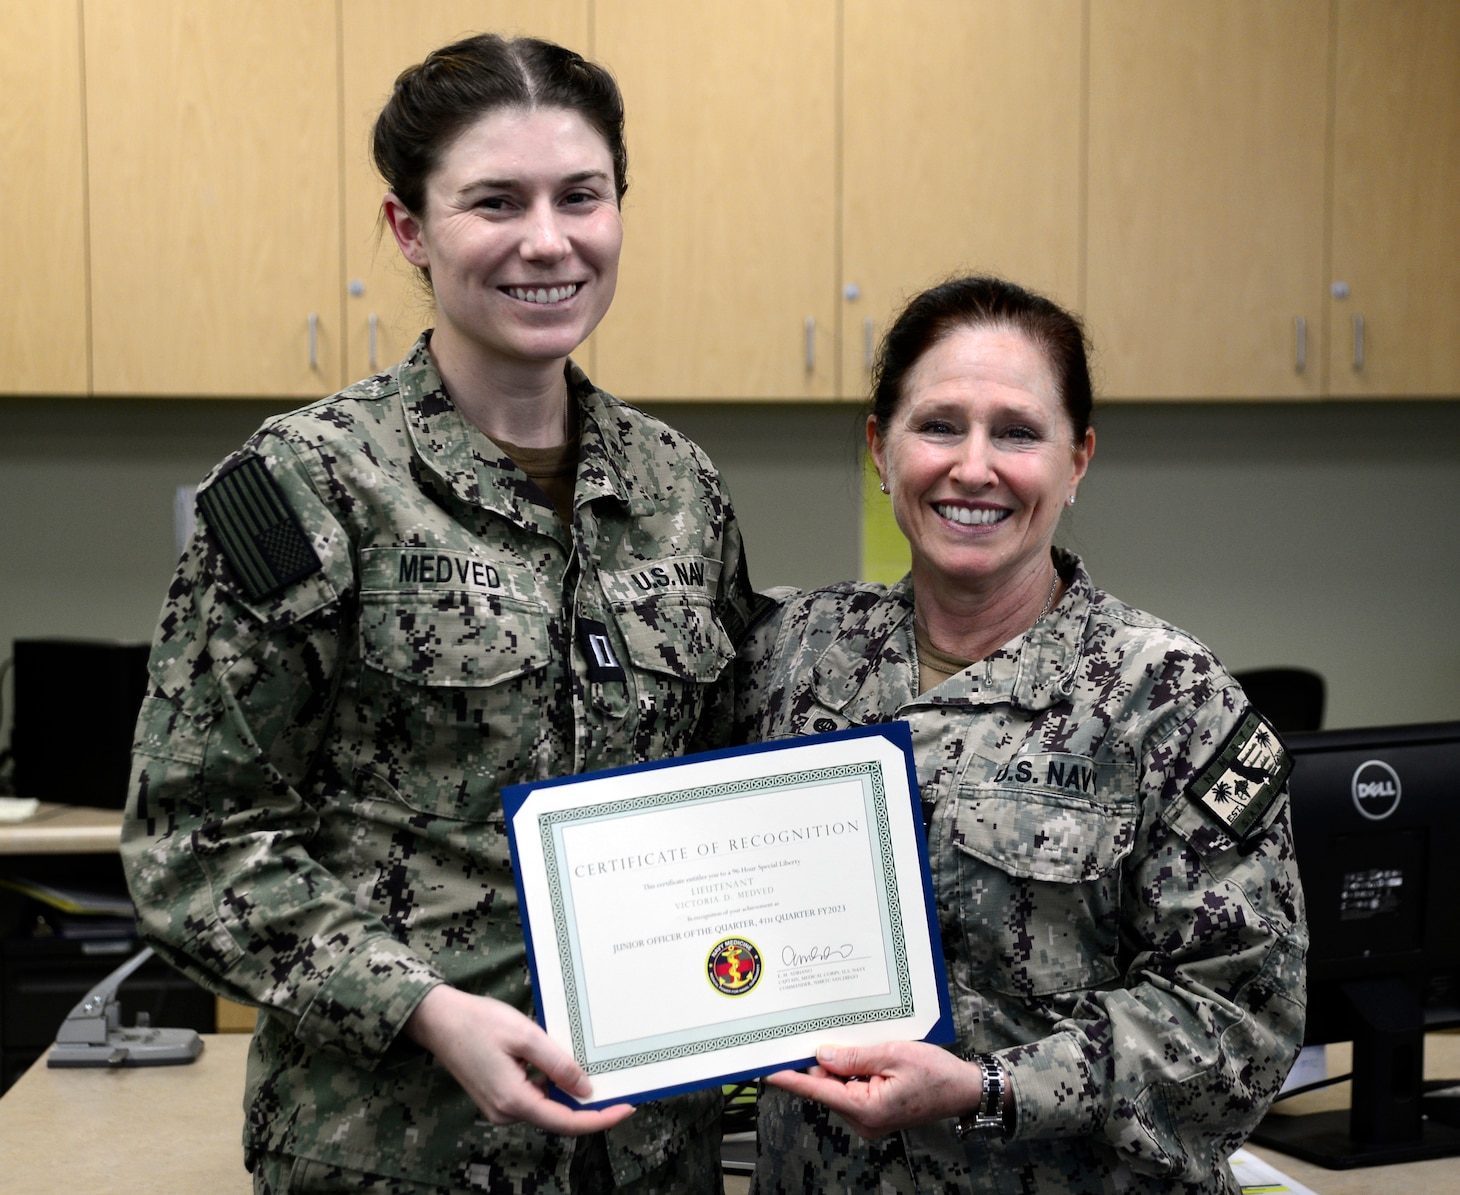 U.S. Navy Capt. Elizabeth Adriano, Navy Medicine Readiness and Training Command's Commander, right, presented Lt. Victoria Medved, left, with a Junior Officer of the Quarter, 4th Quarter, FY2023 certificate during an award presentation at NMRTC San Diego, March 12, 2024. NMRTC San Diego’s mission is to prepare service members to deploy in support of operational forces, deliver high quality healthcare services and shape the future of military medicine through education, training and research. NMRTC San Diego employs more than 6,000 active duty military personnel, civilians and contractors in Southern California to provide patients with world-class care anytime, anywhere. (U.S. Navy photo by Mass Communication Specialist 2nd Class Celia Martin)